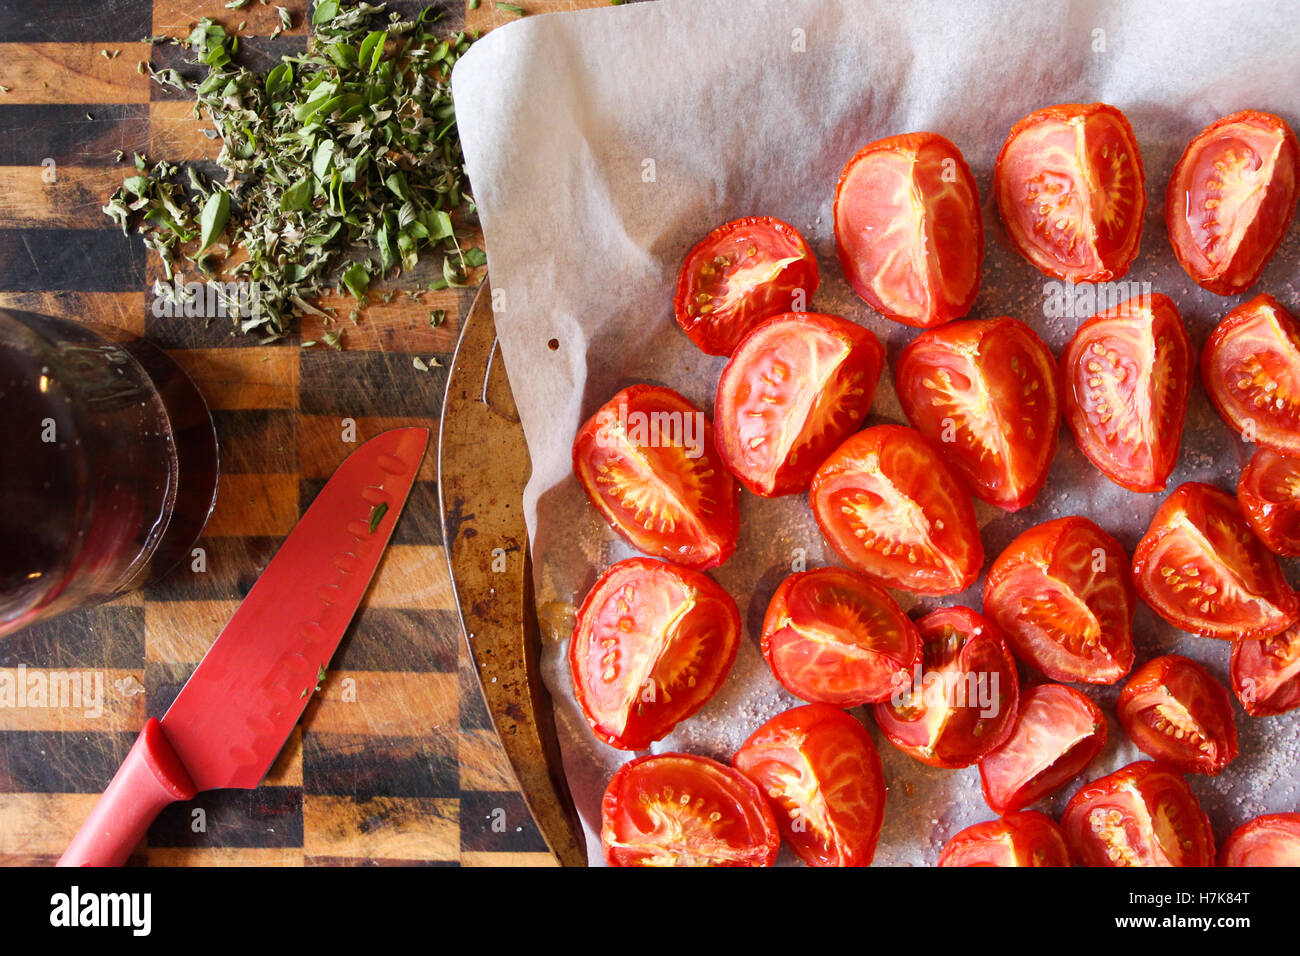 Home-made oven-roasted tomatoes, with fresh herbs and red wine vinegar on hand. Stock Photo